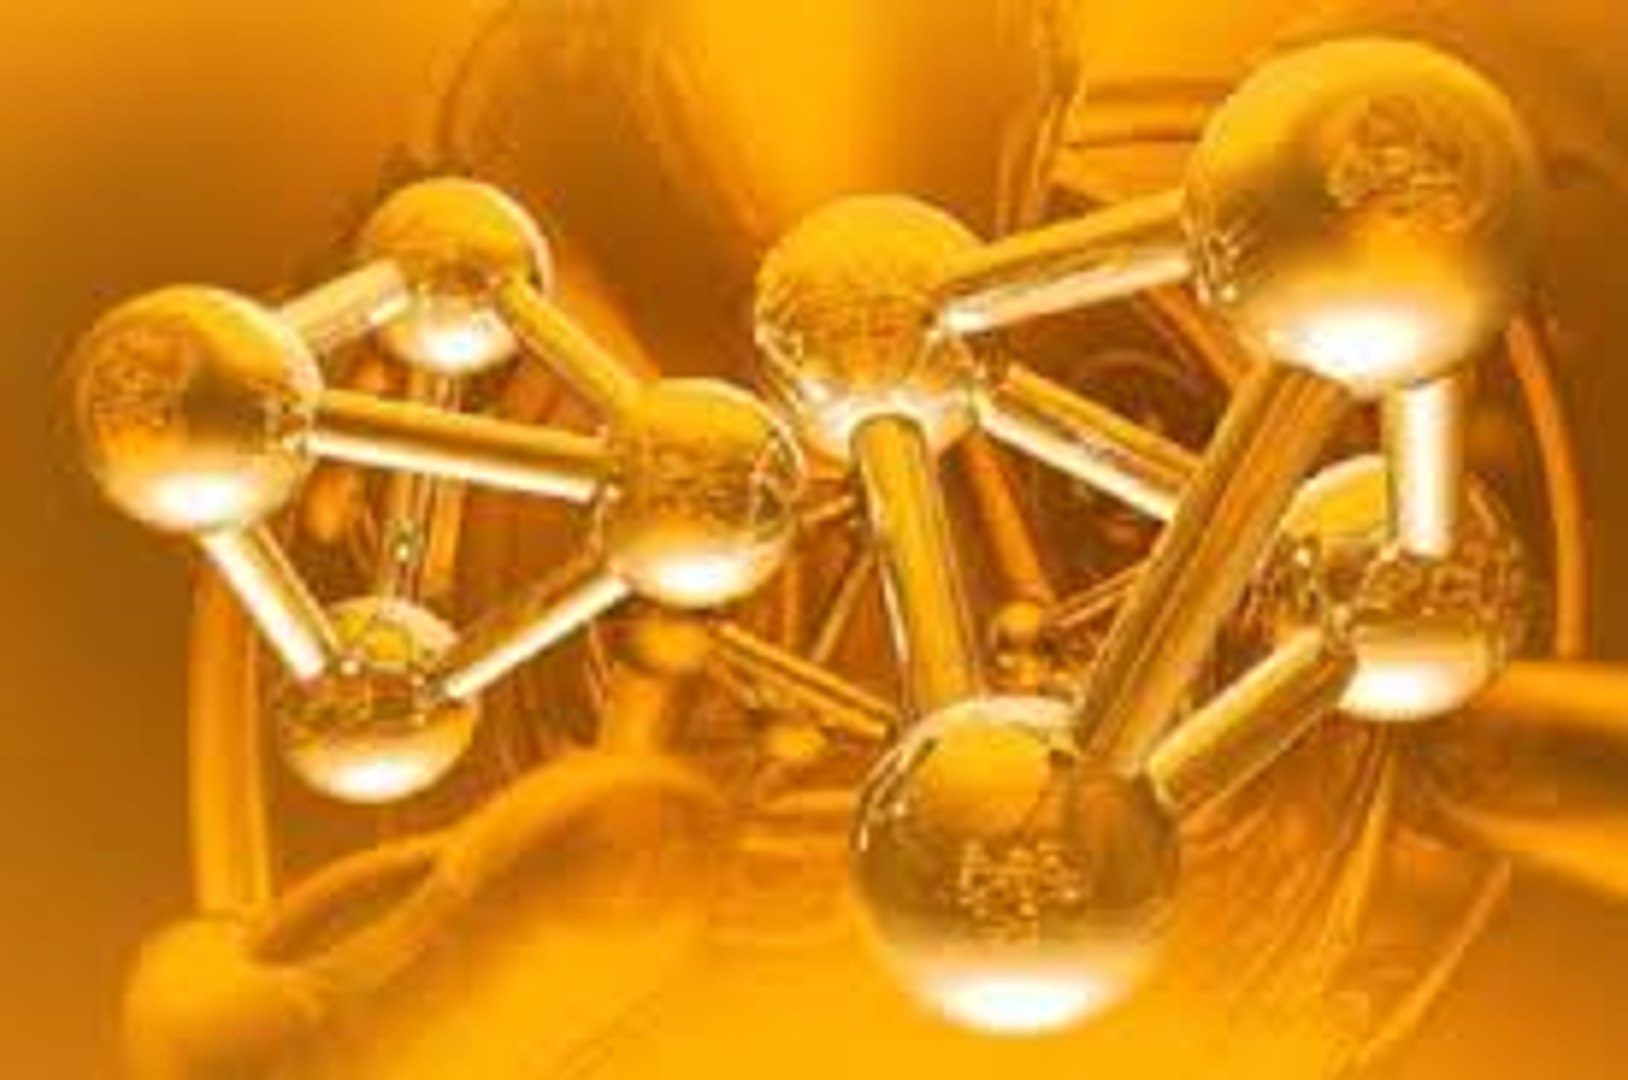 8 - Brian Cox - How Gold Is Made